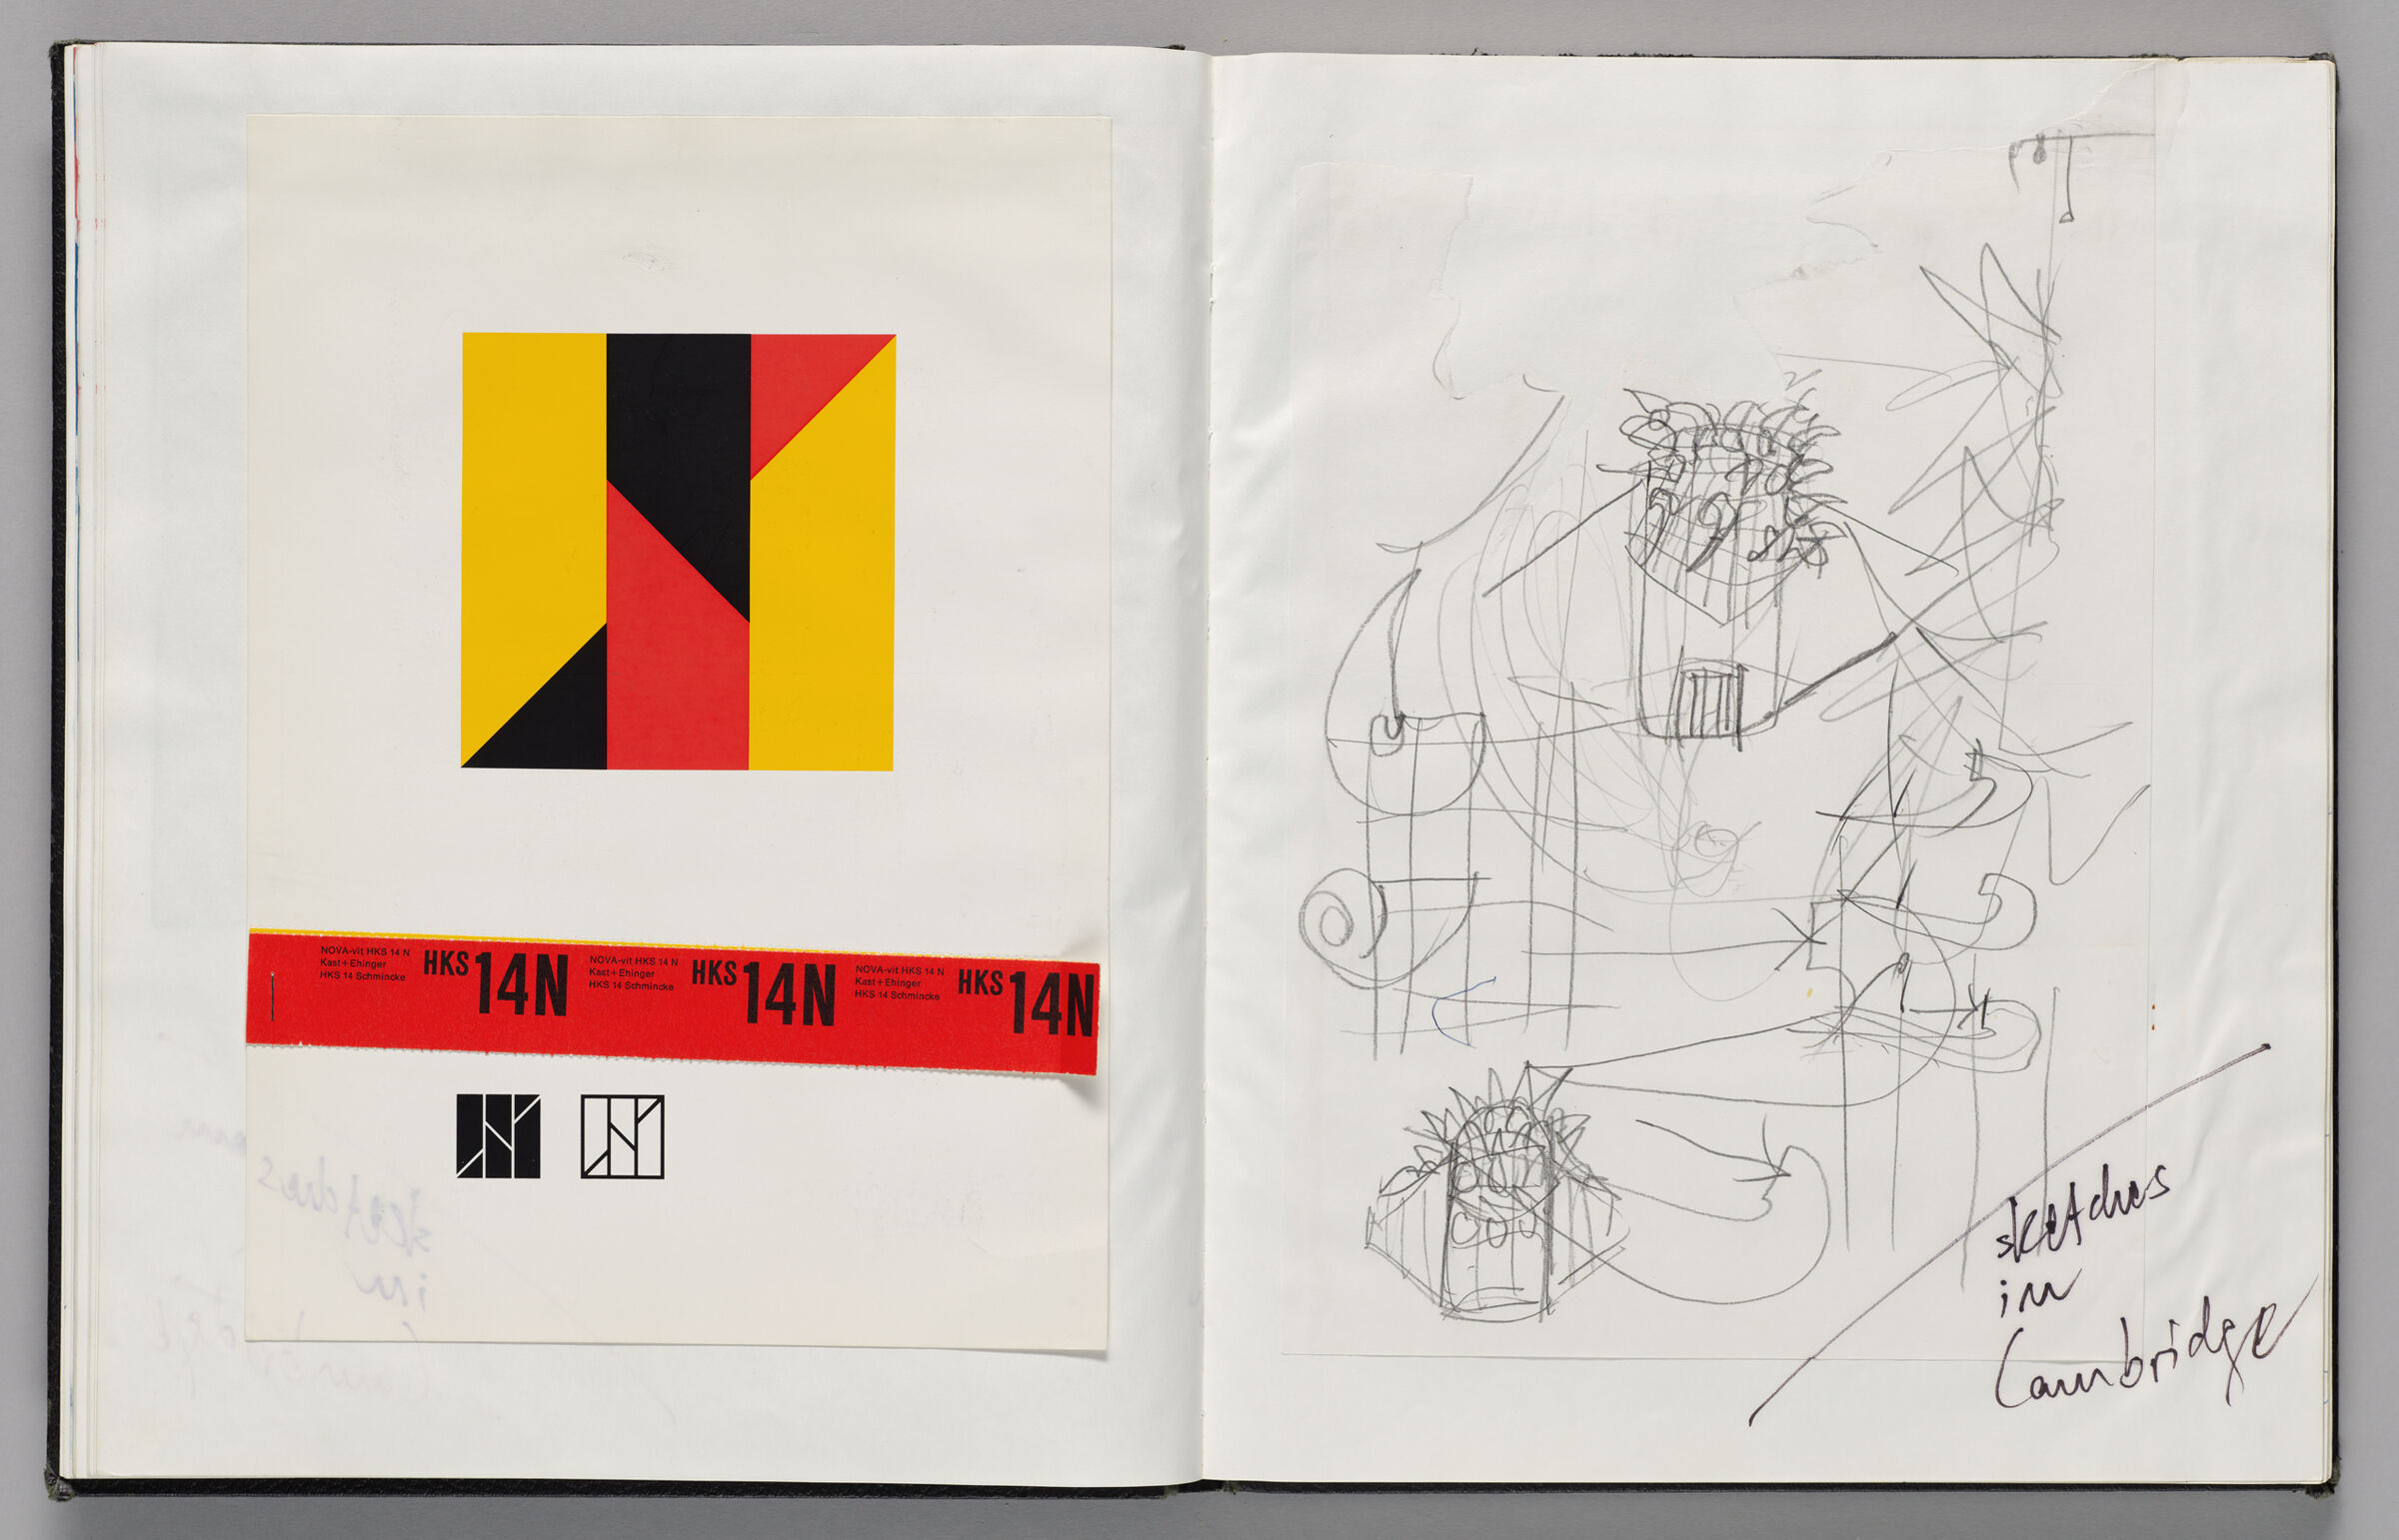 Untitled (Pasted Color Samples From Hks, Left Page); Untitled (Pasted Sketch For Europalia Inflatable, Right Page)